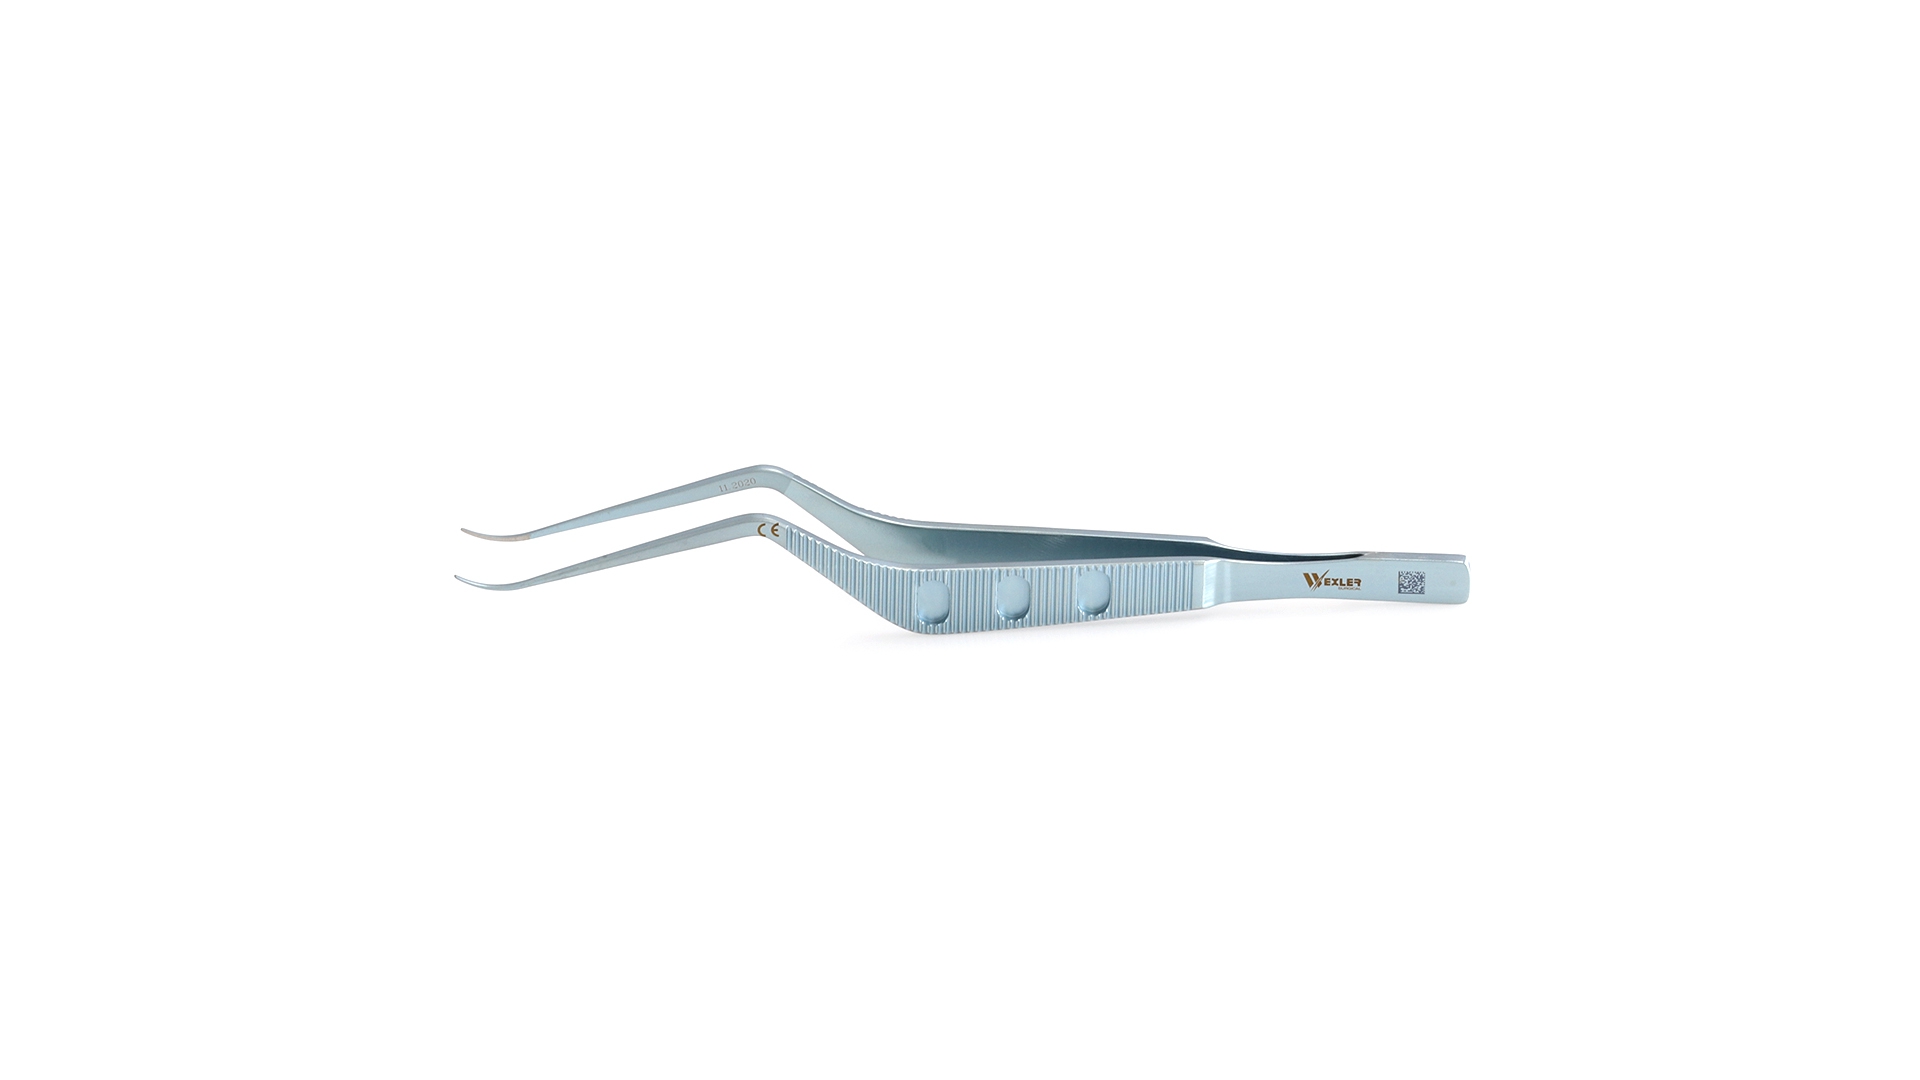 Micro Forceps - 0.5 mm Curved  Blunt  TC coated tips